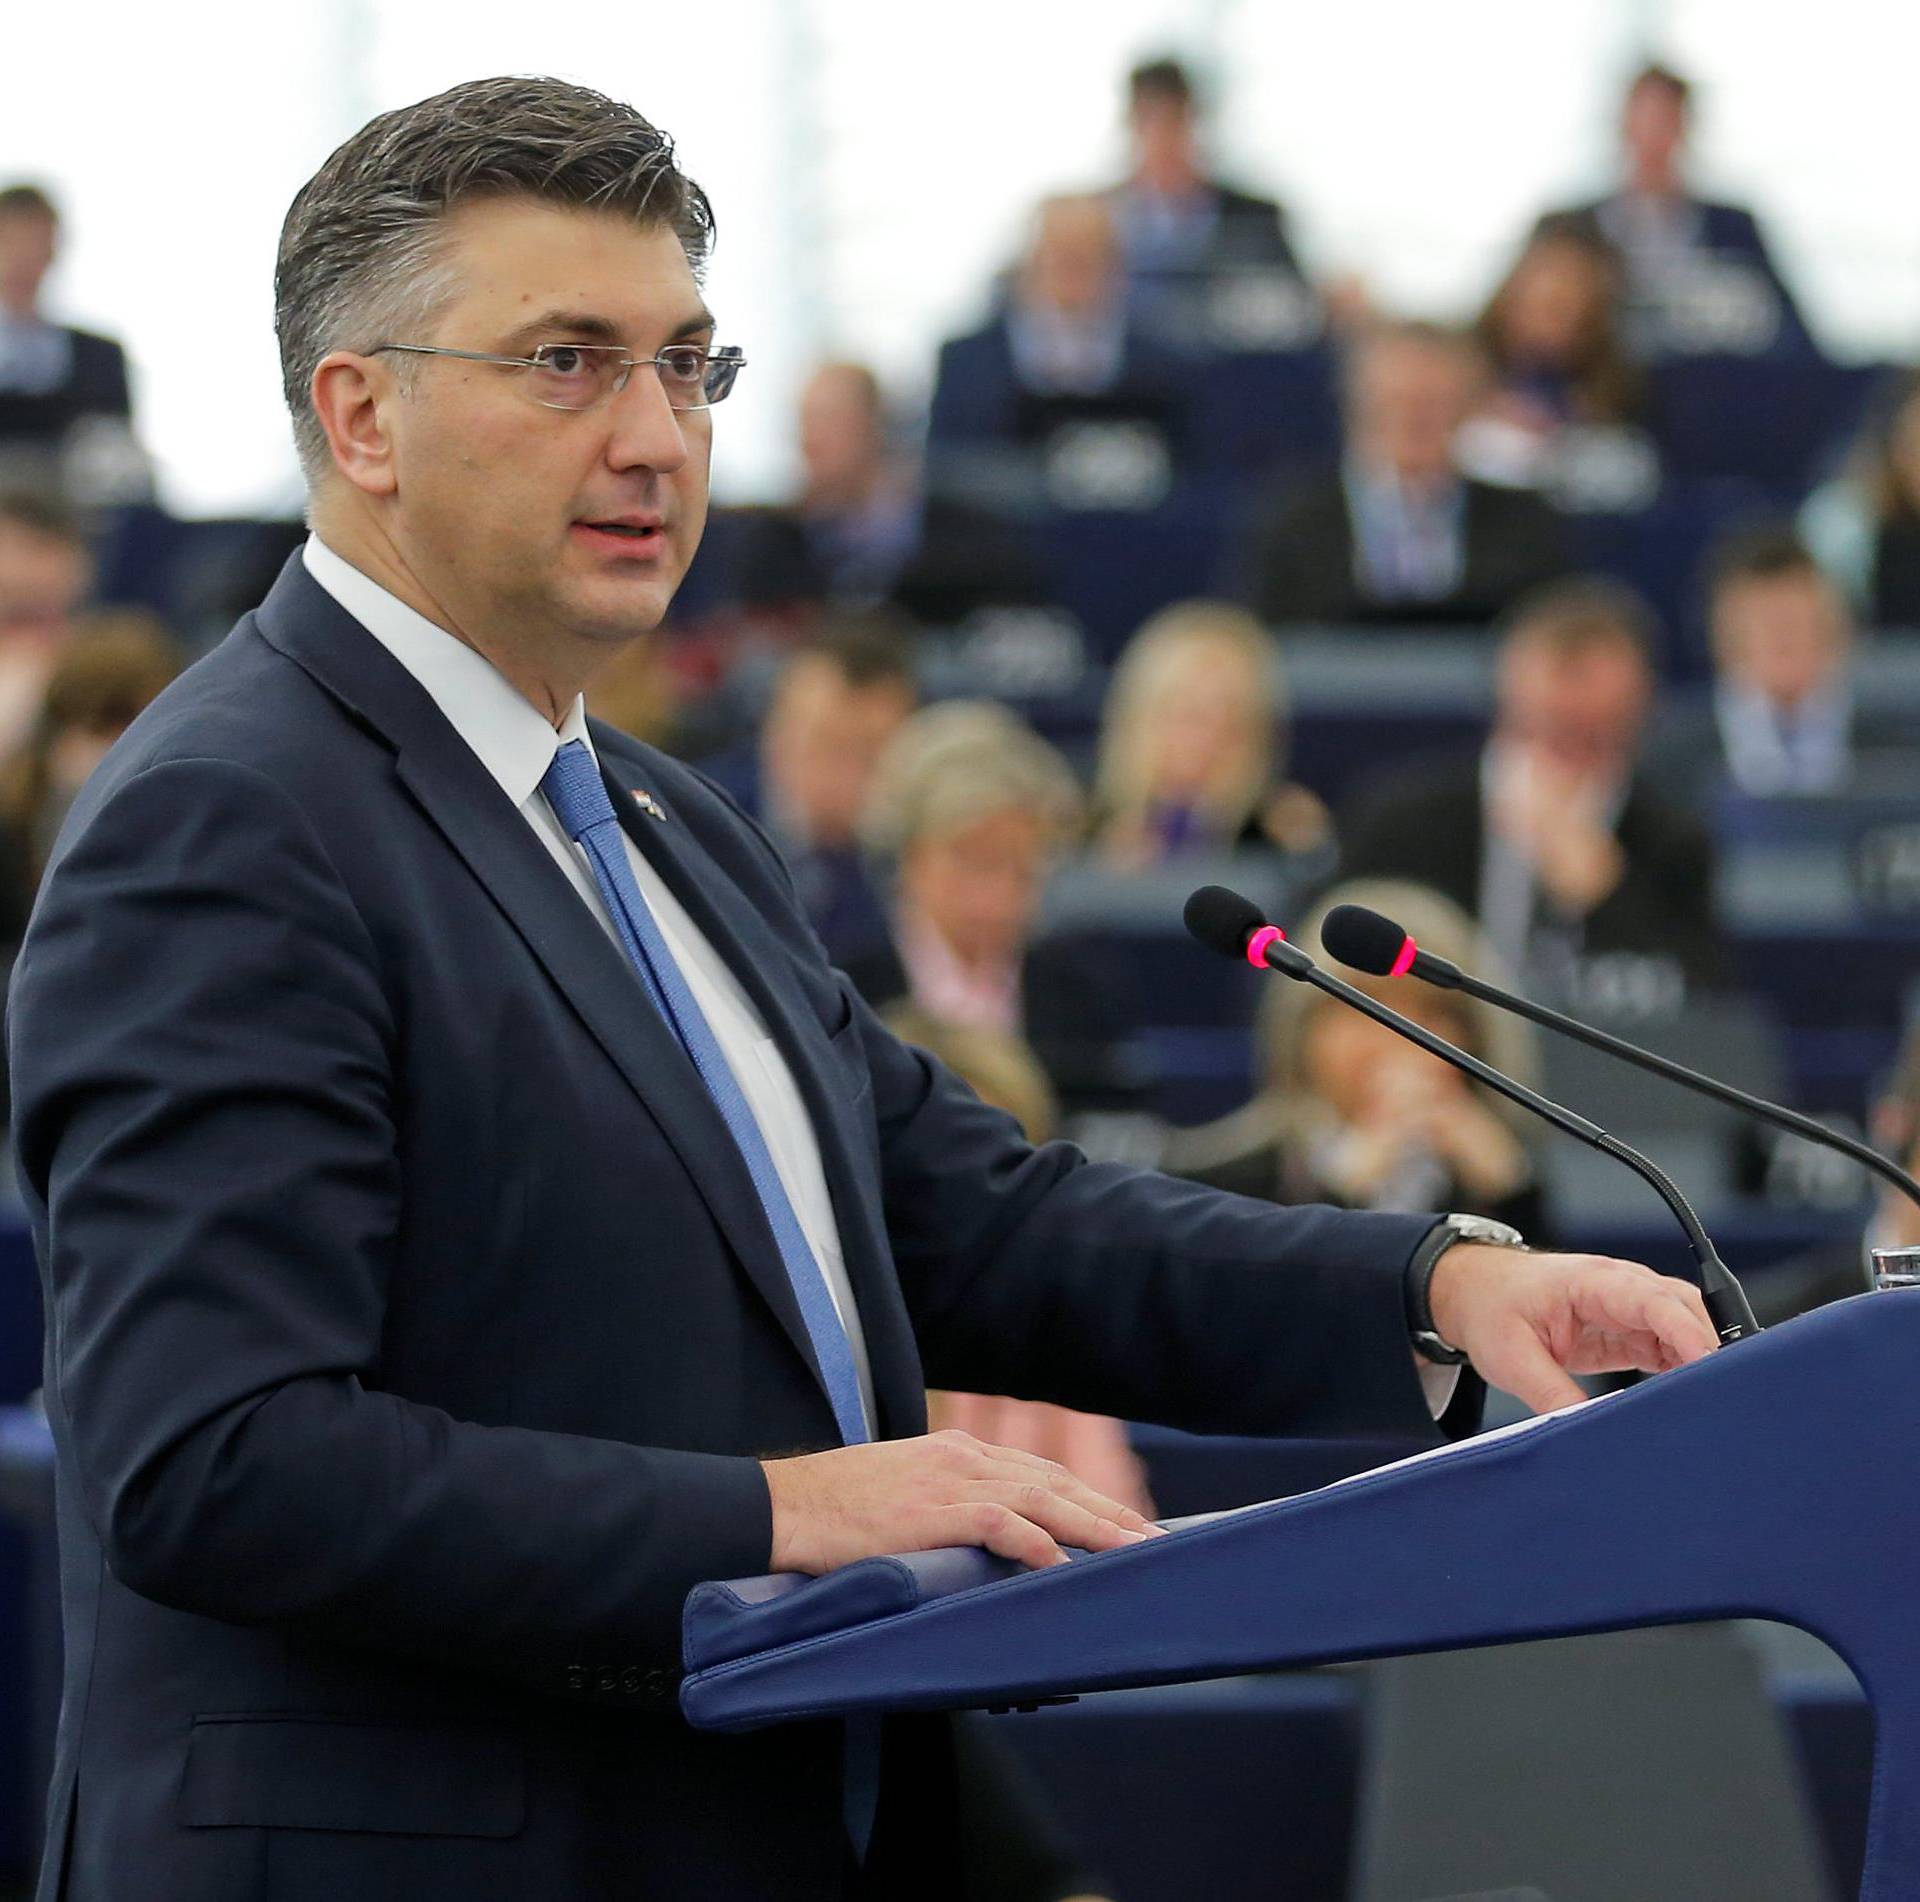 Croatia's Prime Minister Plenkovic delivers a speech during a debate on the Future of Europe at the European Parliament in Strasbourg